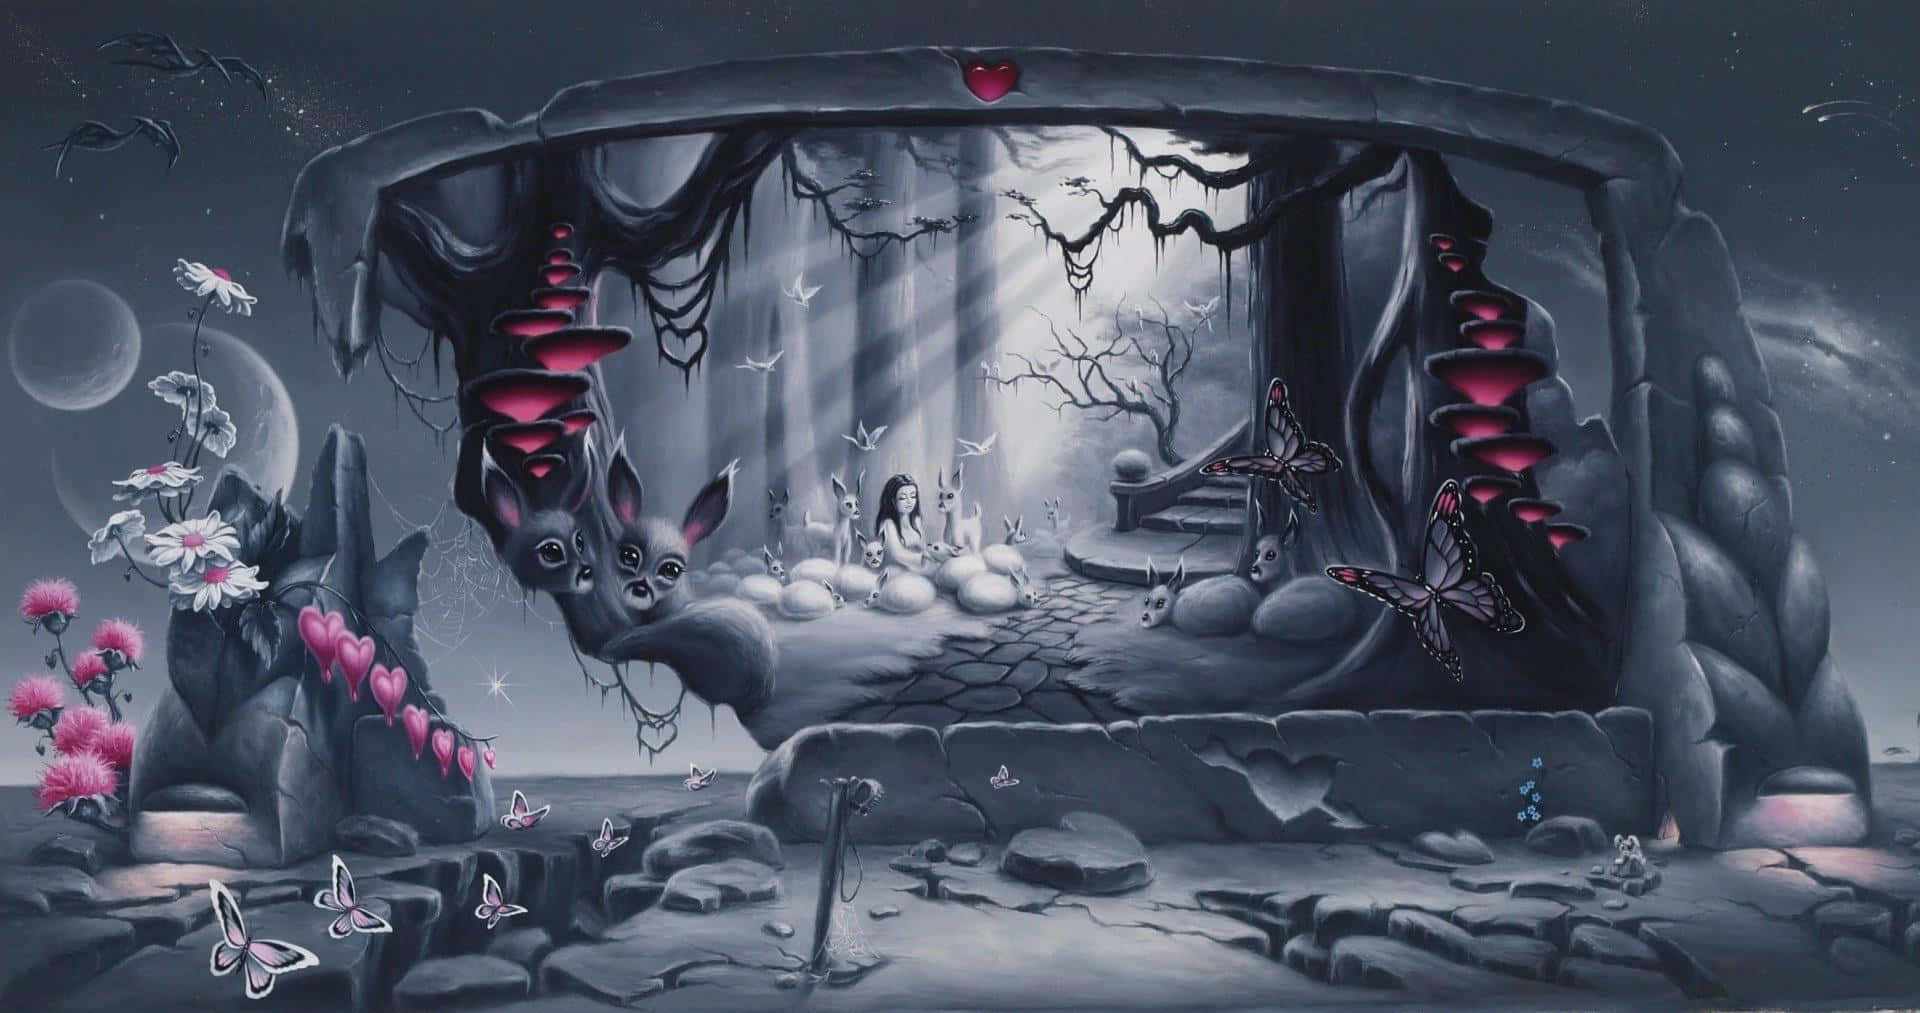 A Painting Of A Dark Room With A Lot Of Decorations